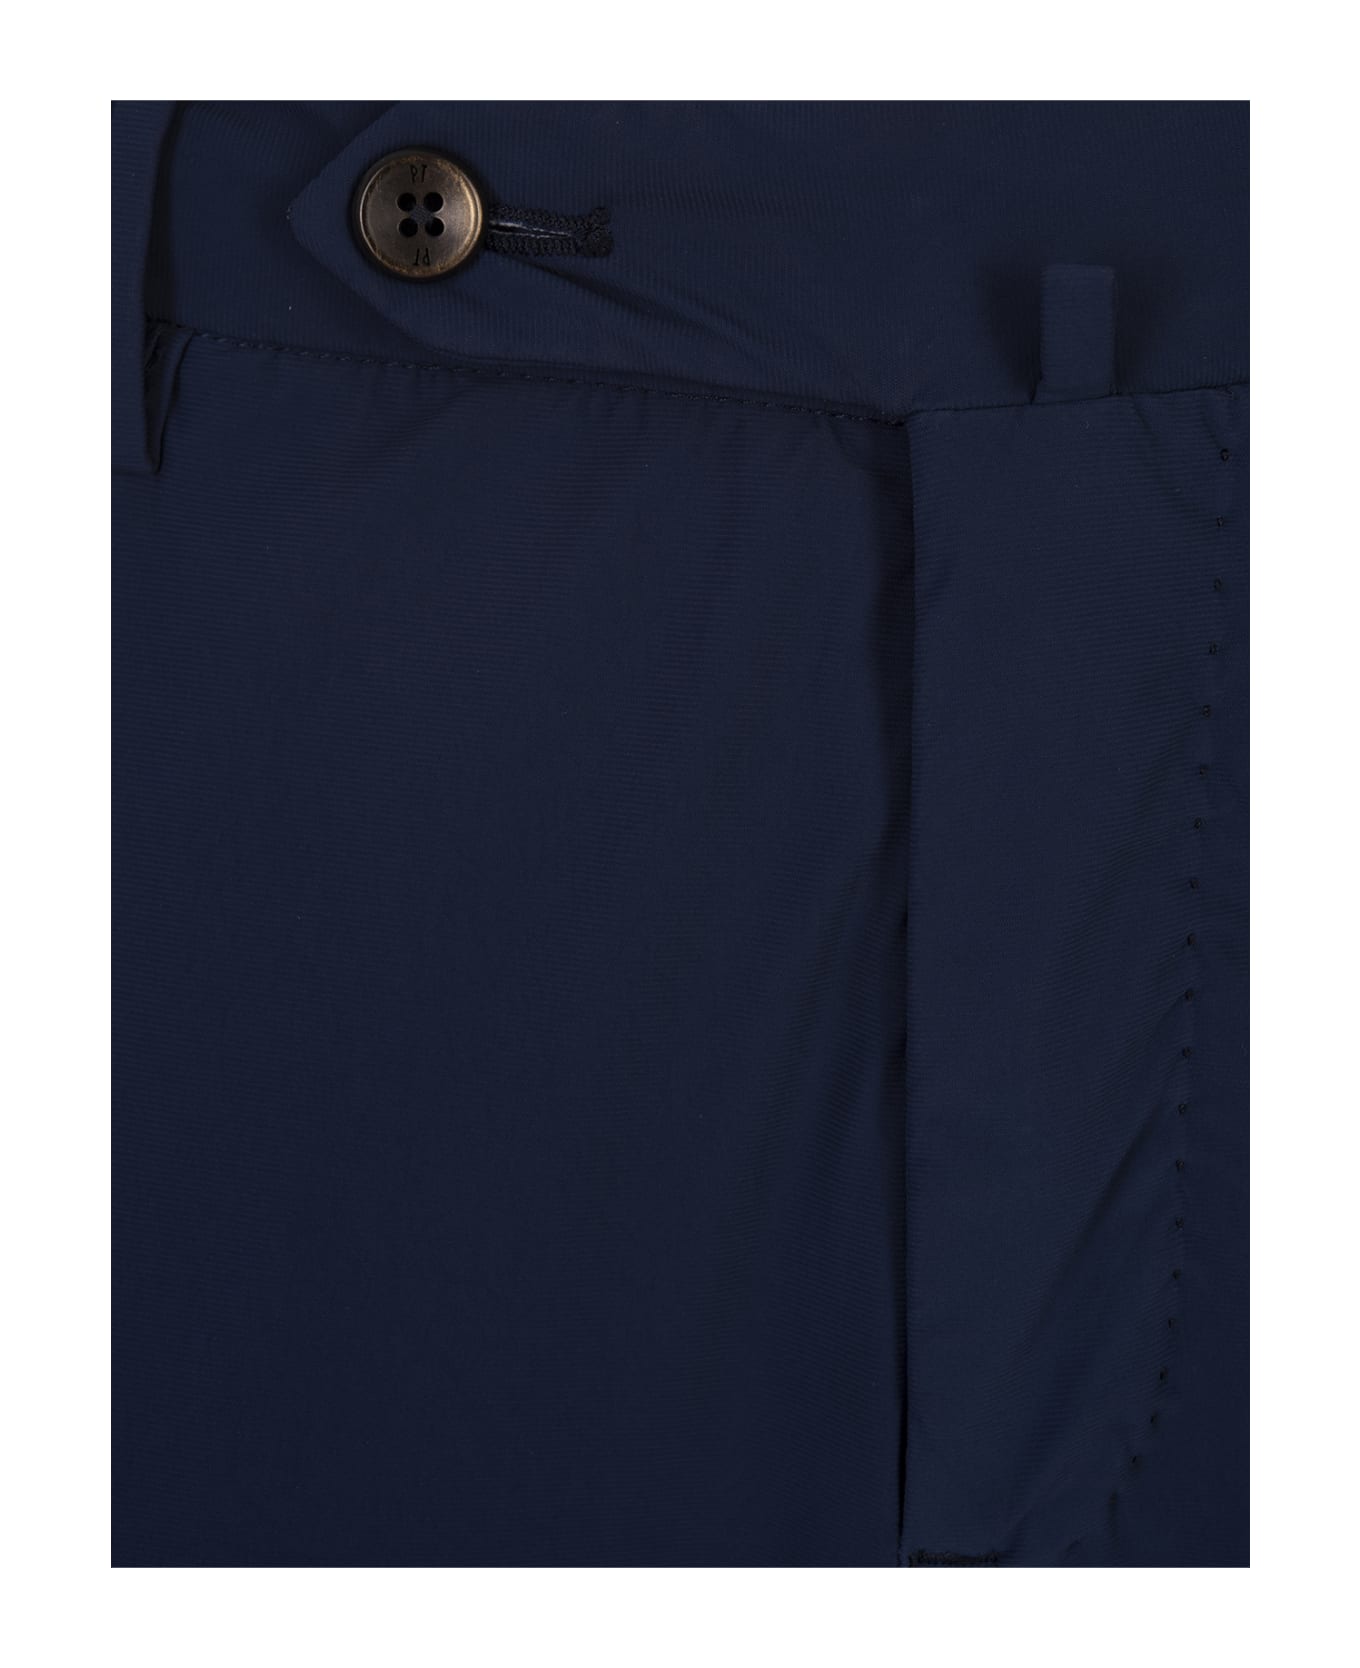 PT Torino Blue Kinetic Fabric Classic Trousers - Blue ボトムス